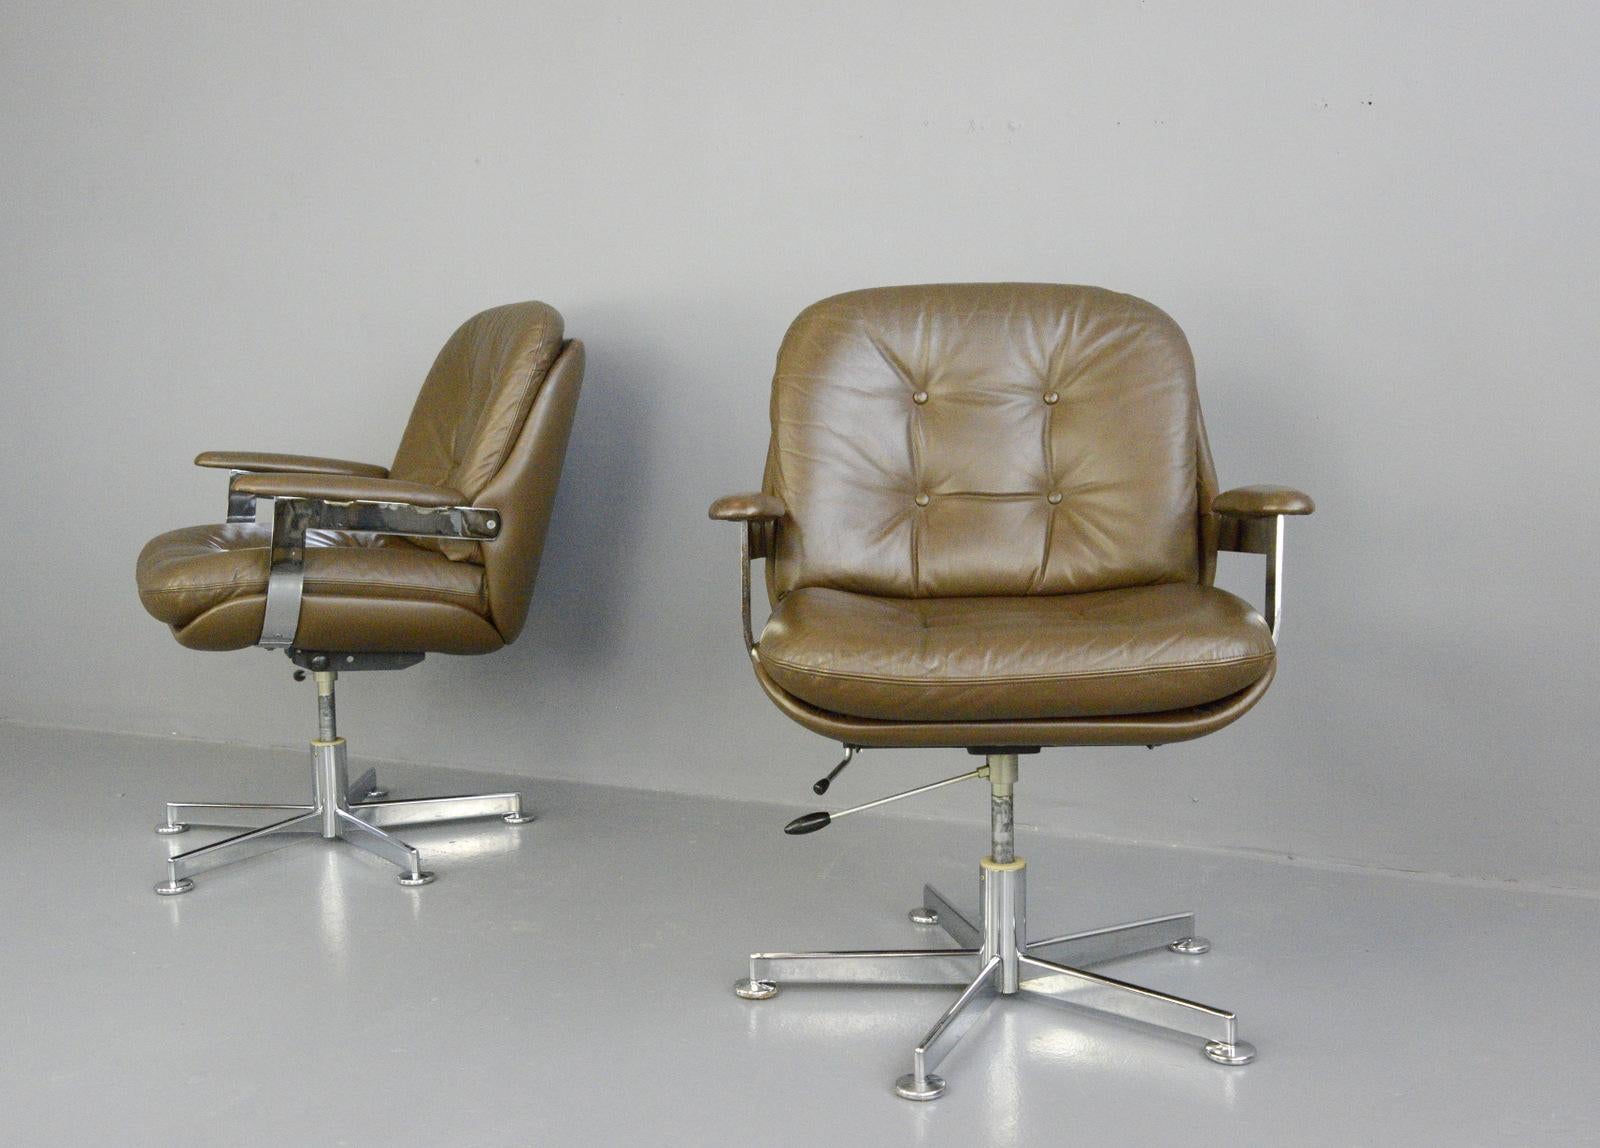 Leather executive chairs by Ring Mobelfabrikk, circa 1970s.

- Price is per chair
- Quality chocolate brown leather 
- Button back
- Height adjustable and reclining 
- Polished chrome arms and base
- Made by Ring Mobelfabrikk
- Norwegian,